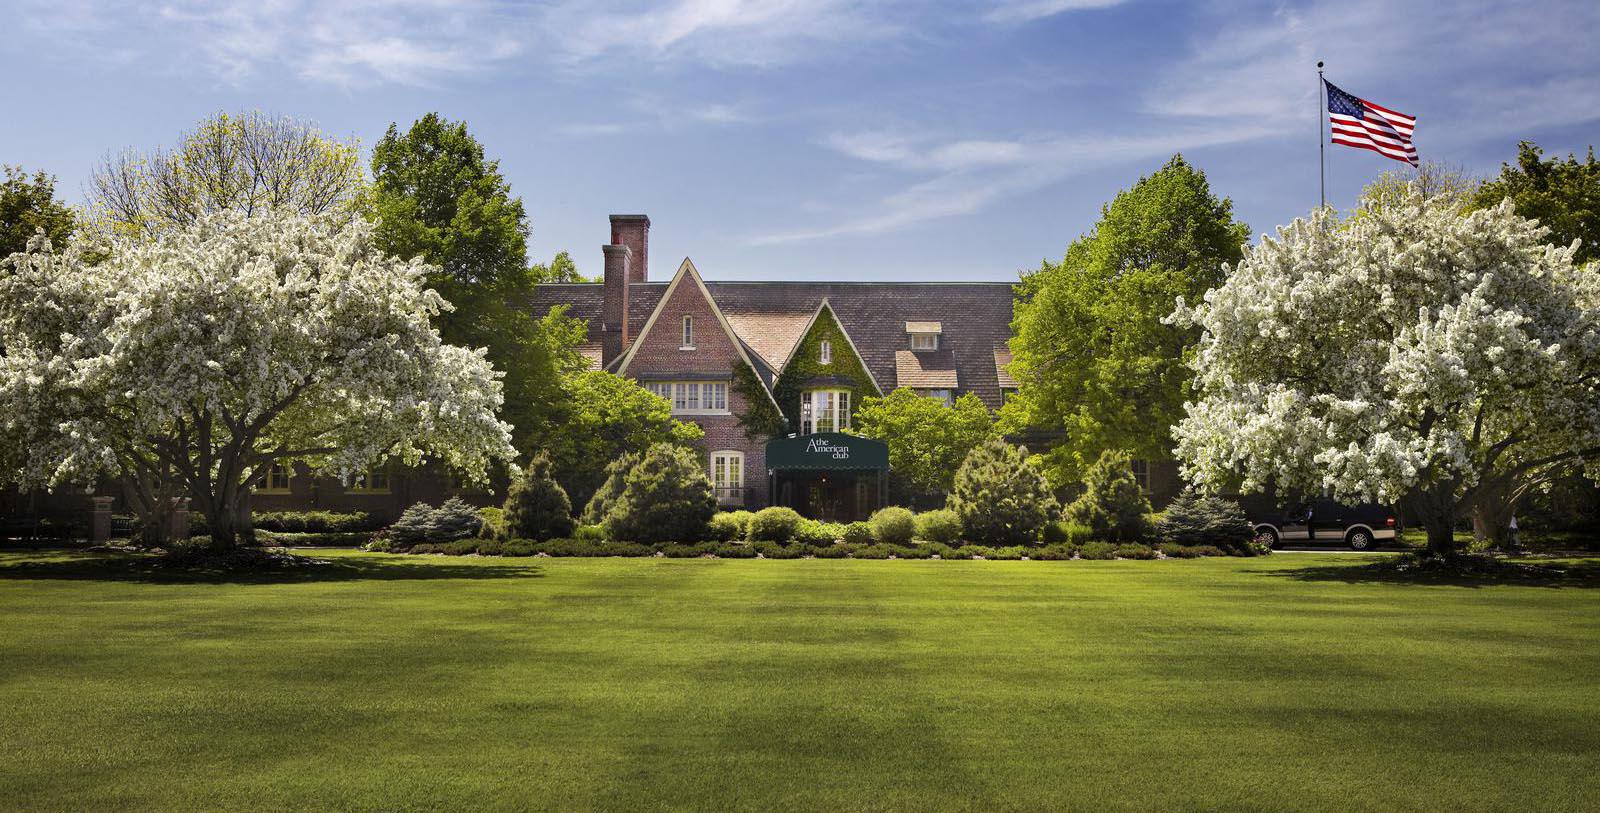 Discover the Tudor Revival-style architecture of The American Club.